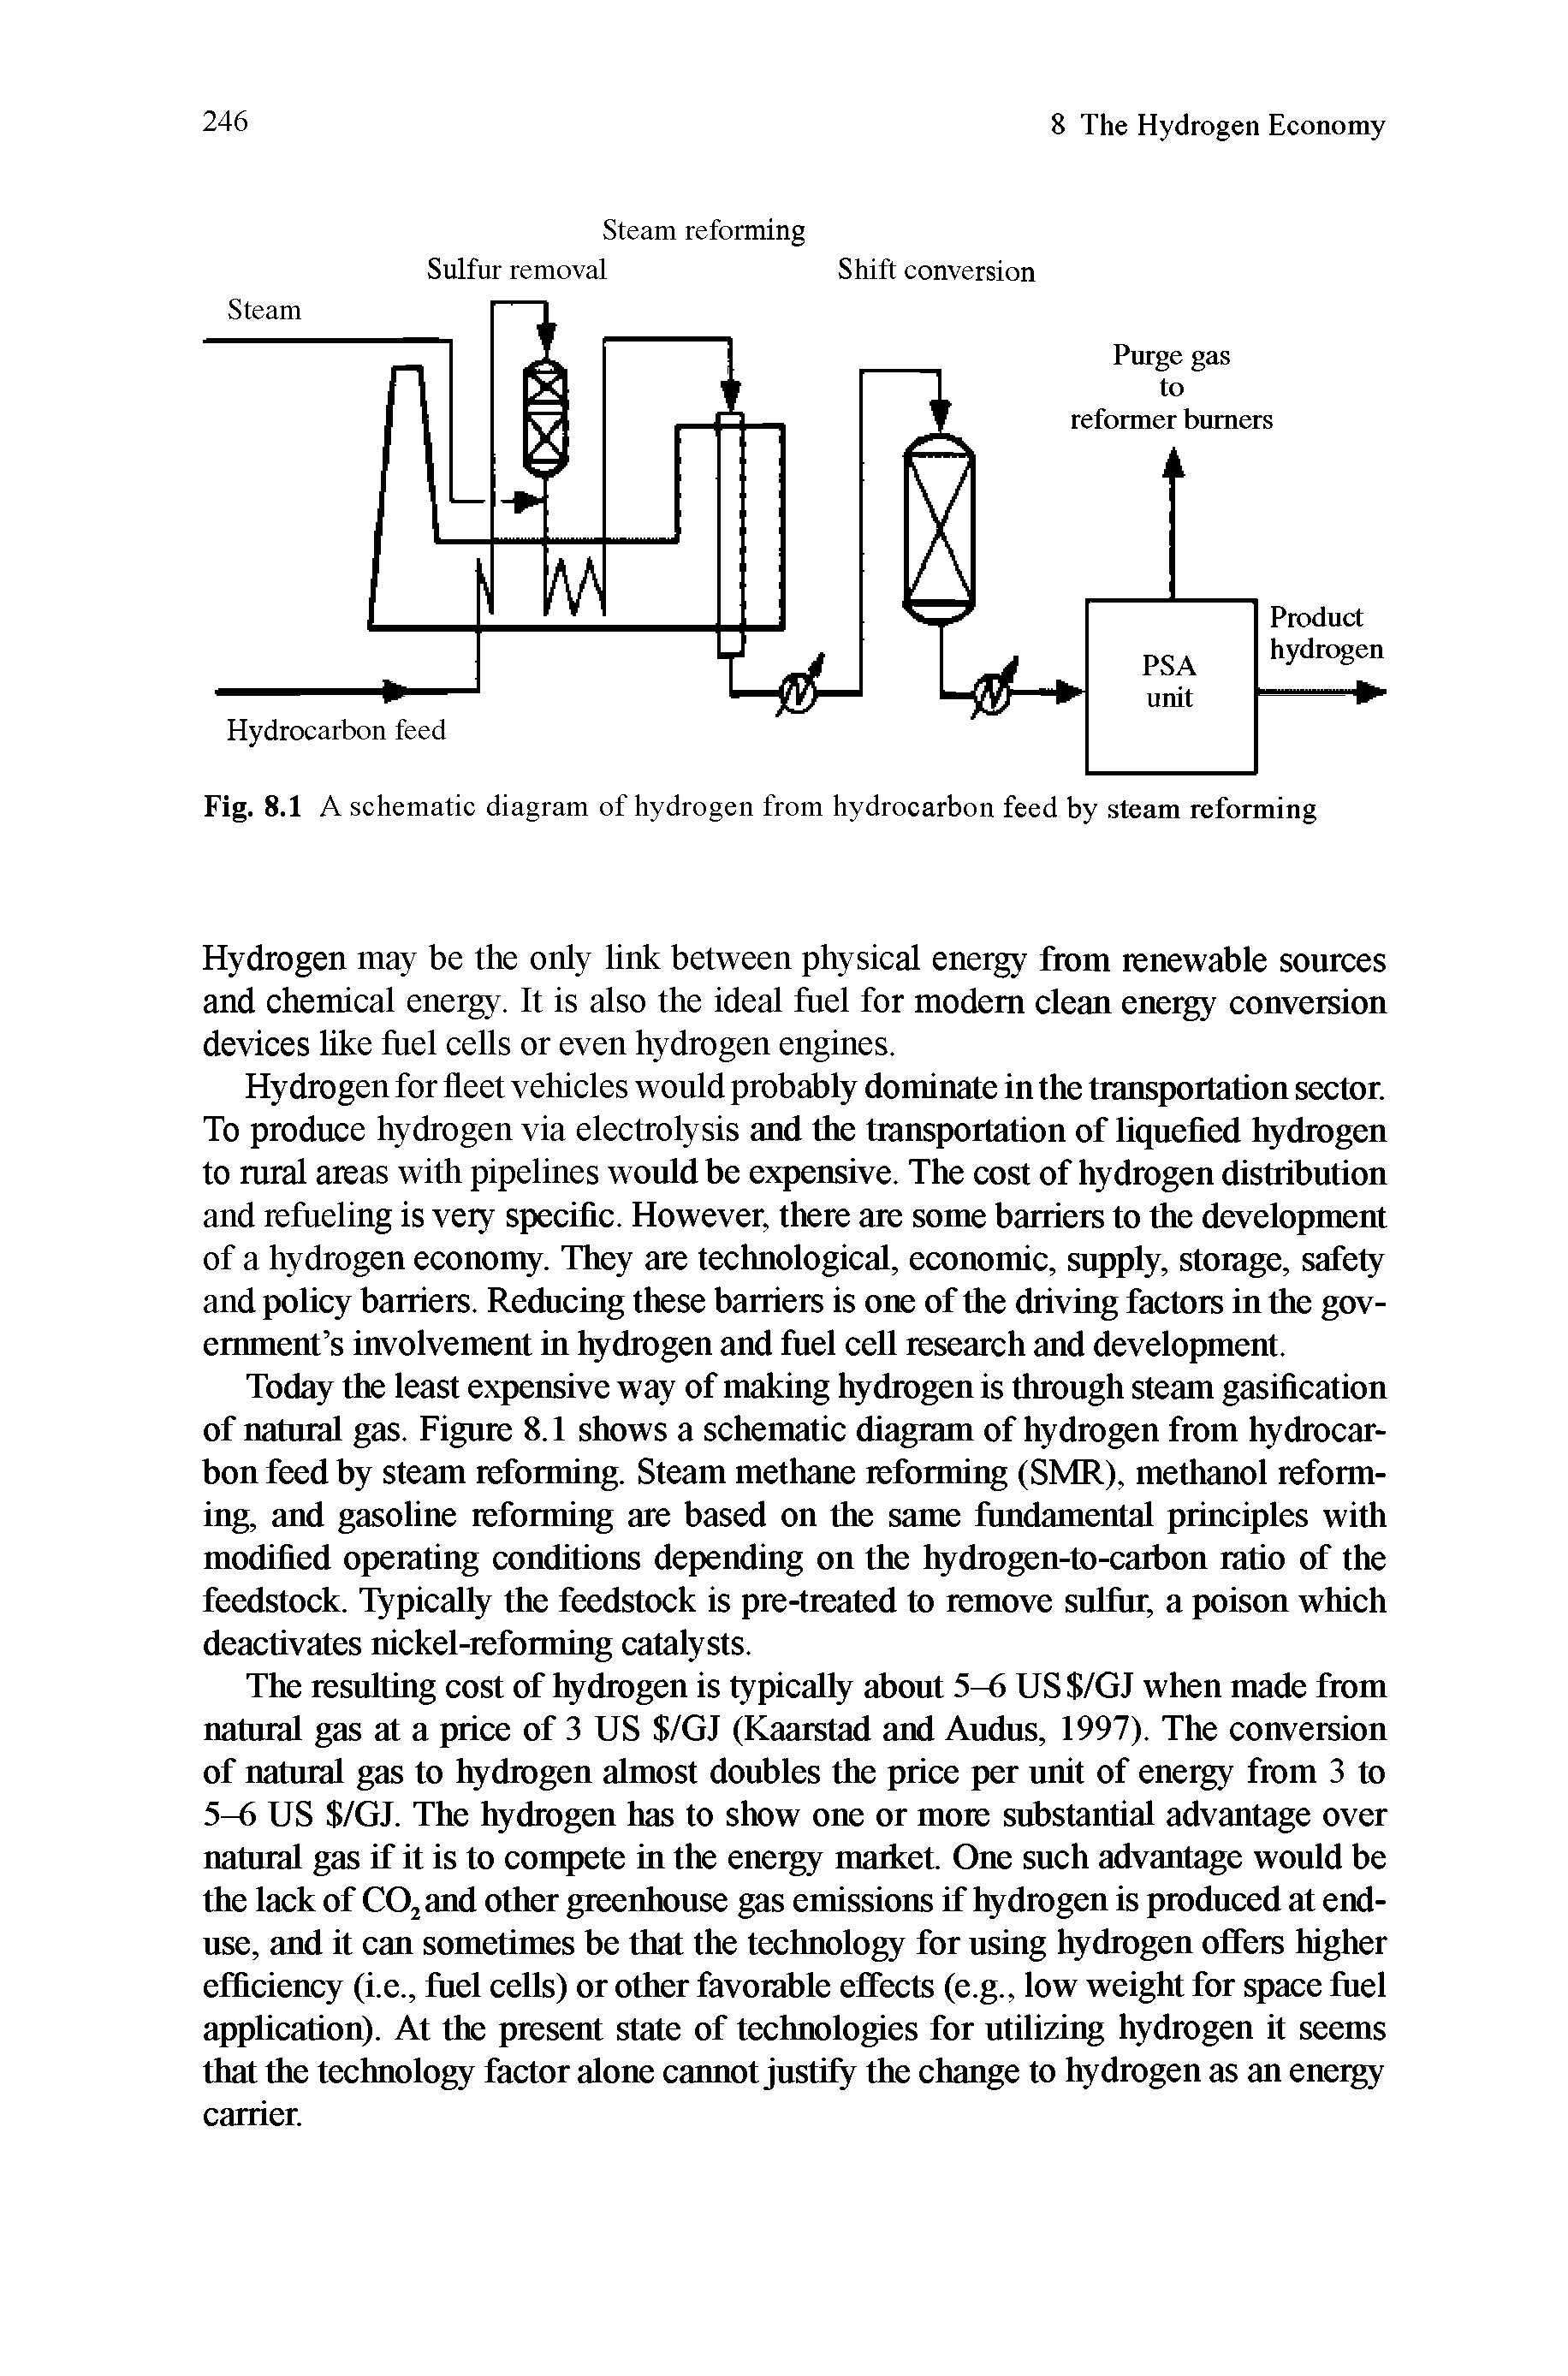 Fig. 8.1 A schematic diagram of hydrogen from hydrocarbon feed by steam reforming...